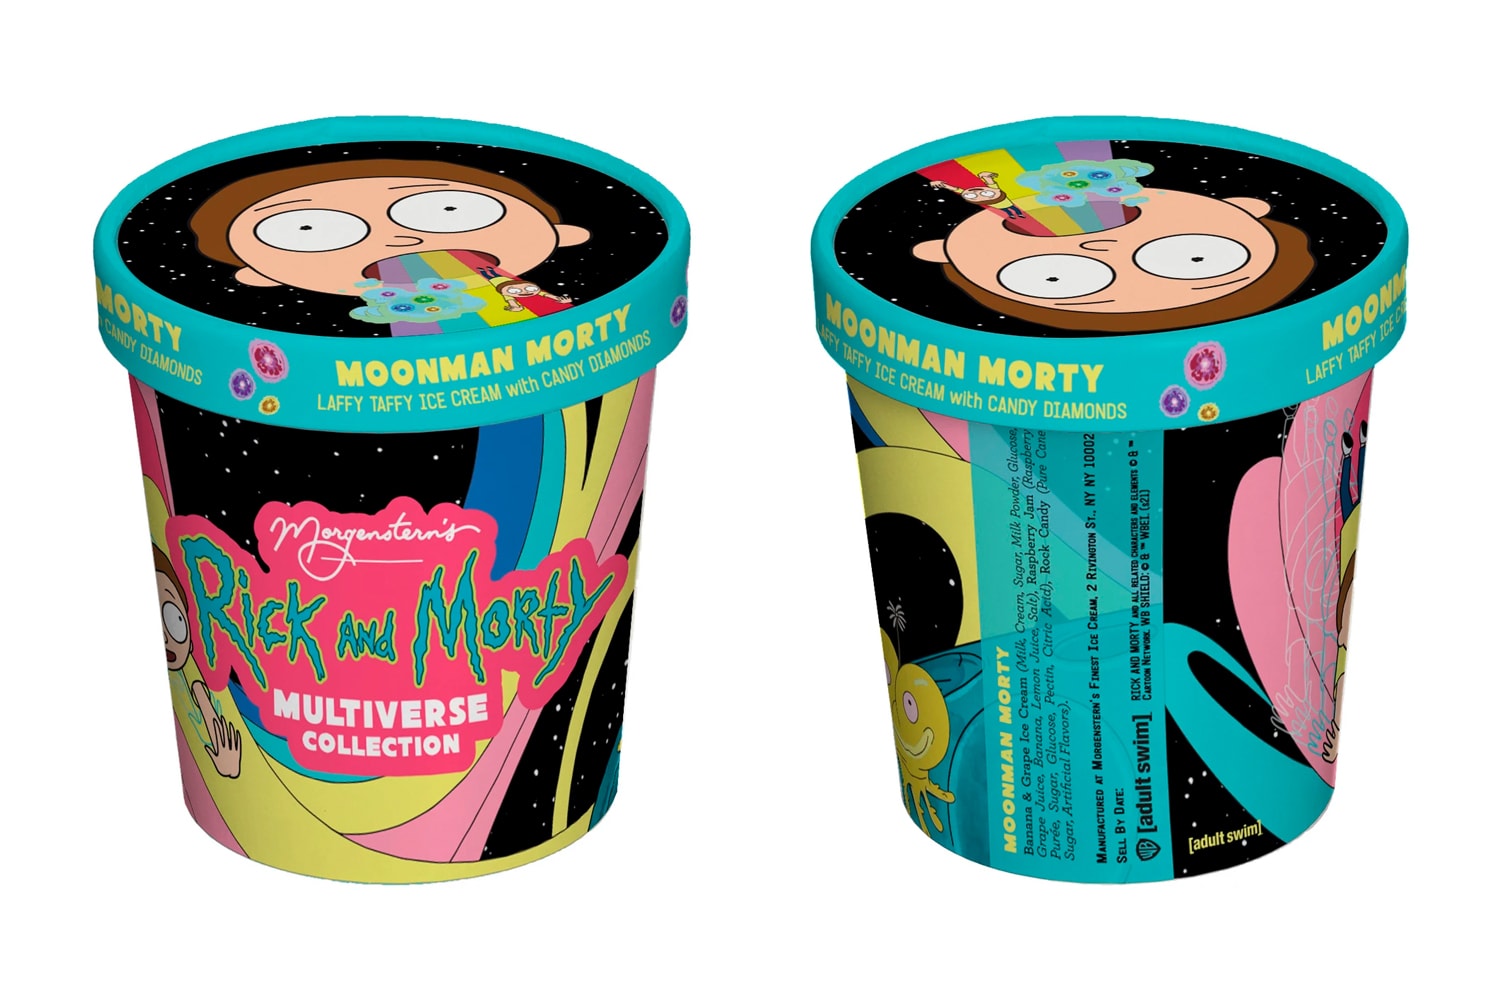 Rick & Morty Morgenstern’s Finest Ice Cream Multiverse Collection Release Info Buy Price Taste Review Adult Swim Ricky Road Moonman Morty Glorzo Empress Summer Mr. Poopy Butthole